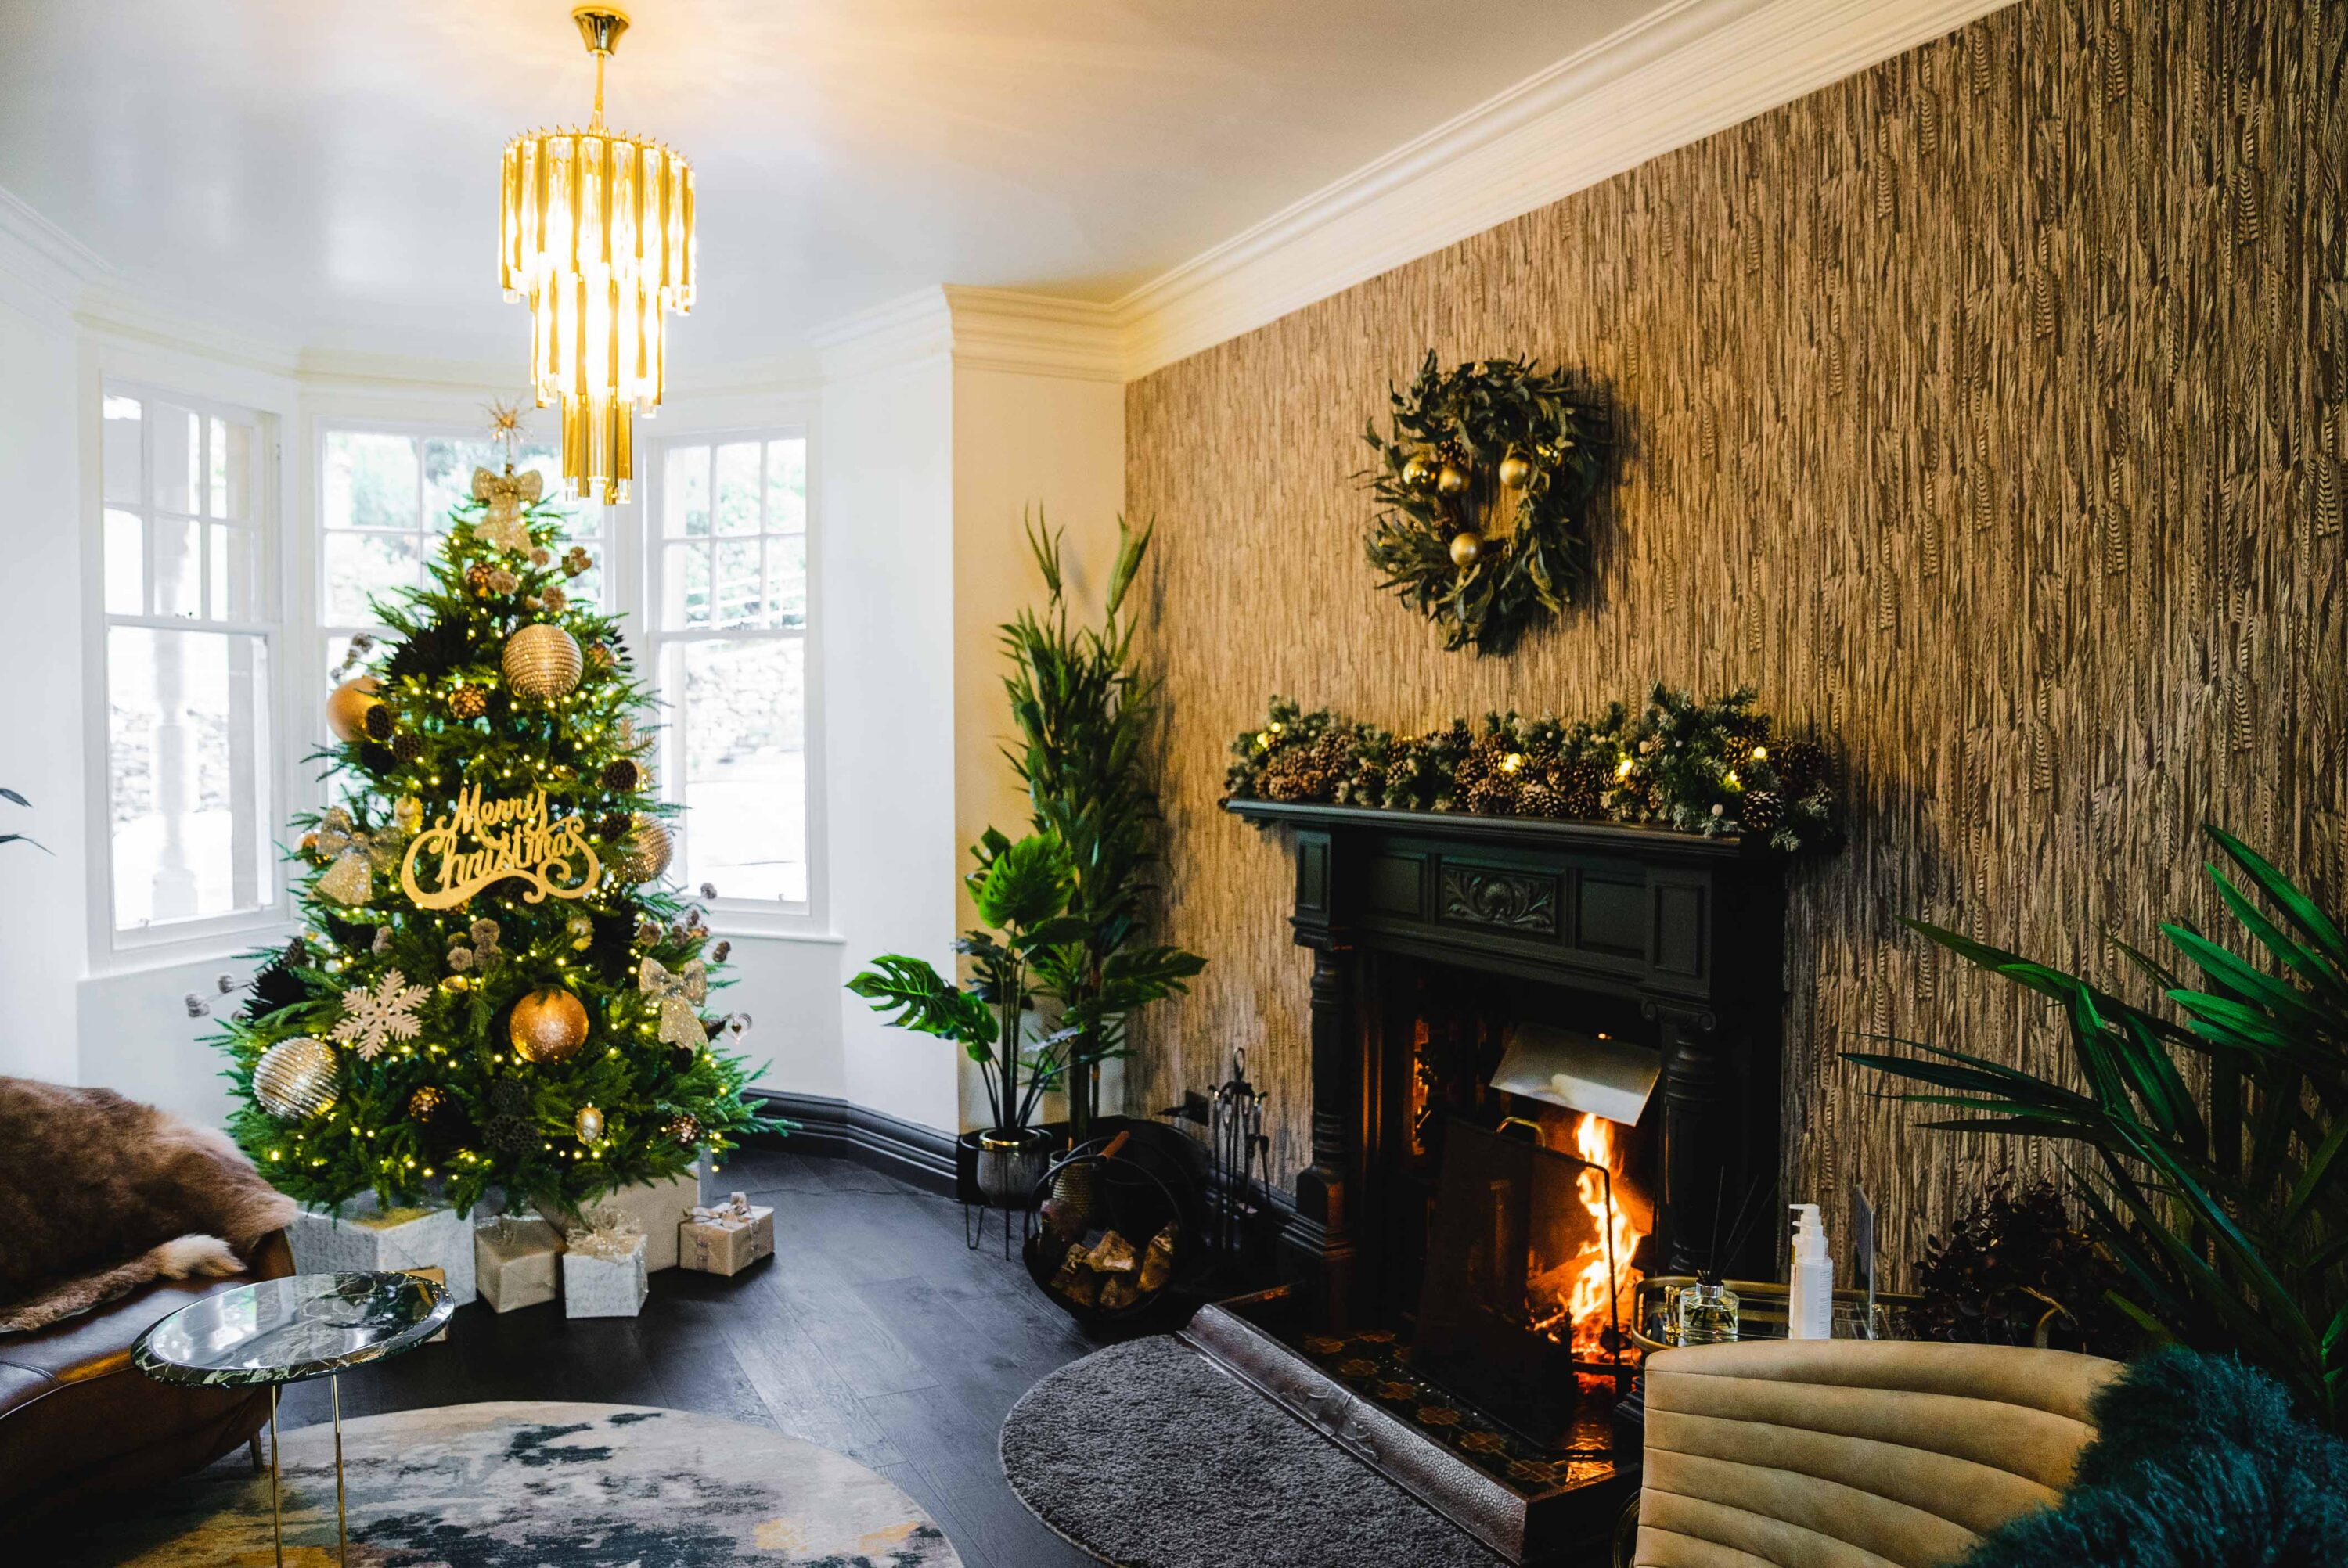 Lake District Christmas Hotel Packages with Twist!